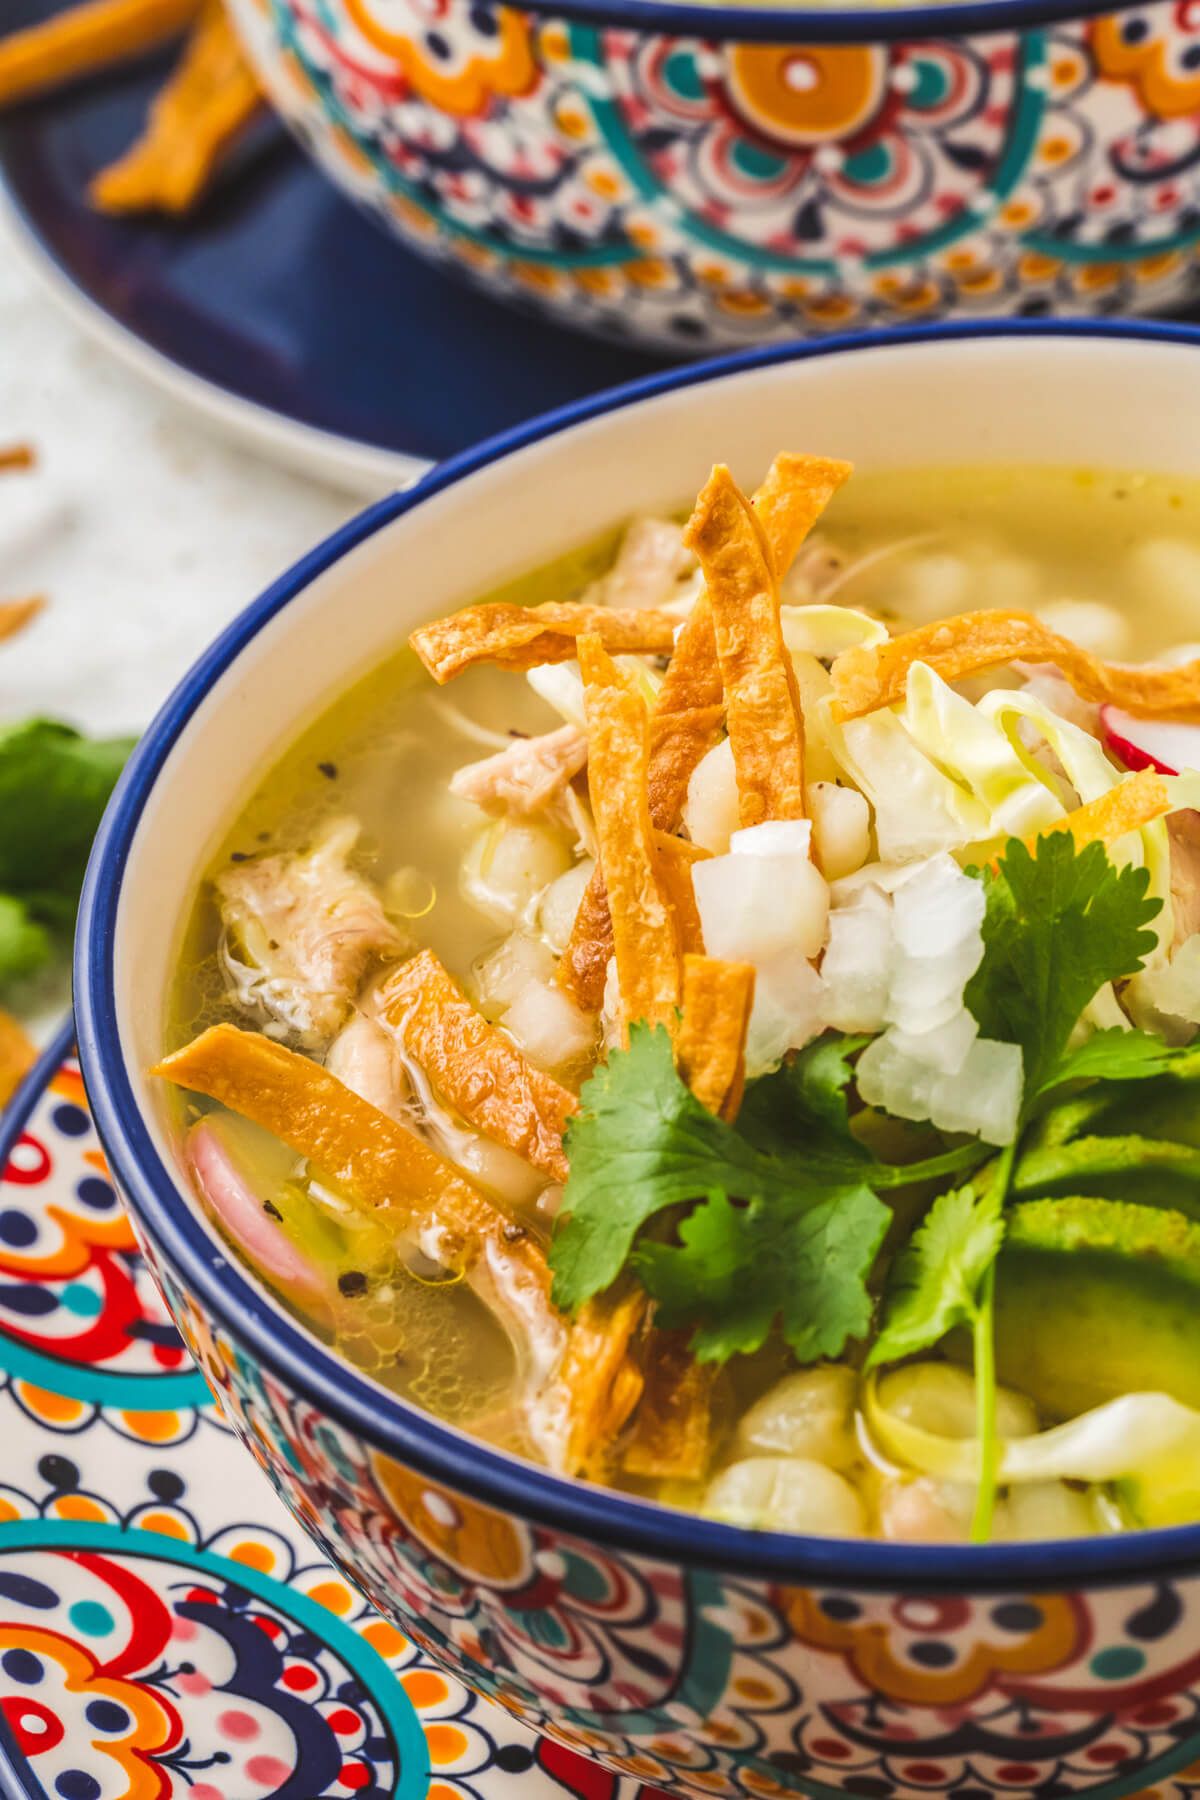 A colourful soup bowl containing Pozole blanco featuring white hominy, cilantro, radishes, cabbage, lime wedge, and strips of fried tortilla.